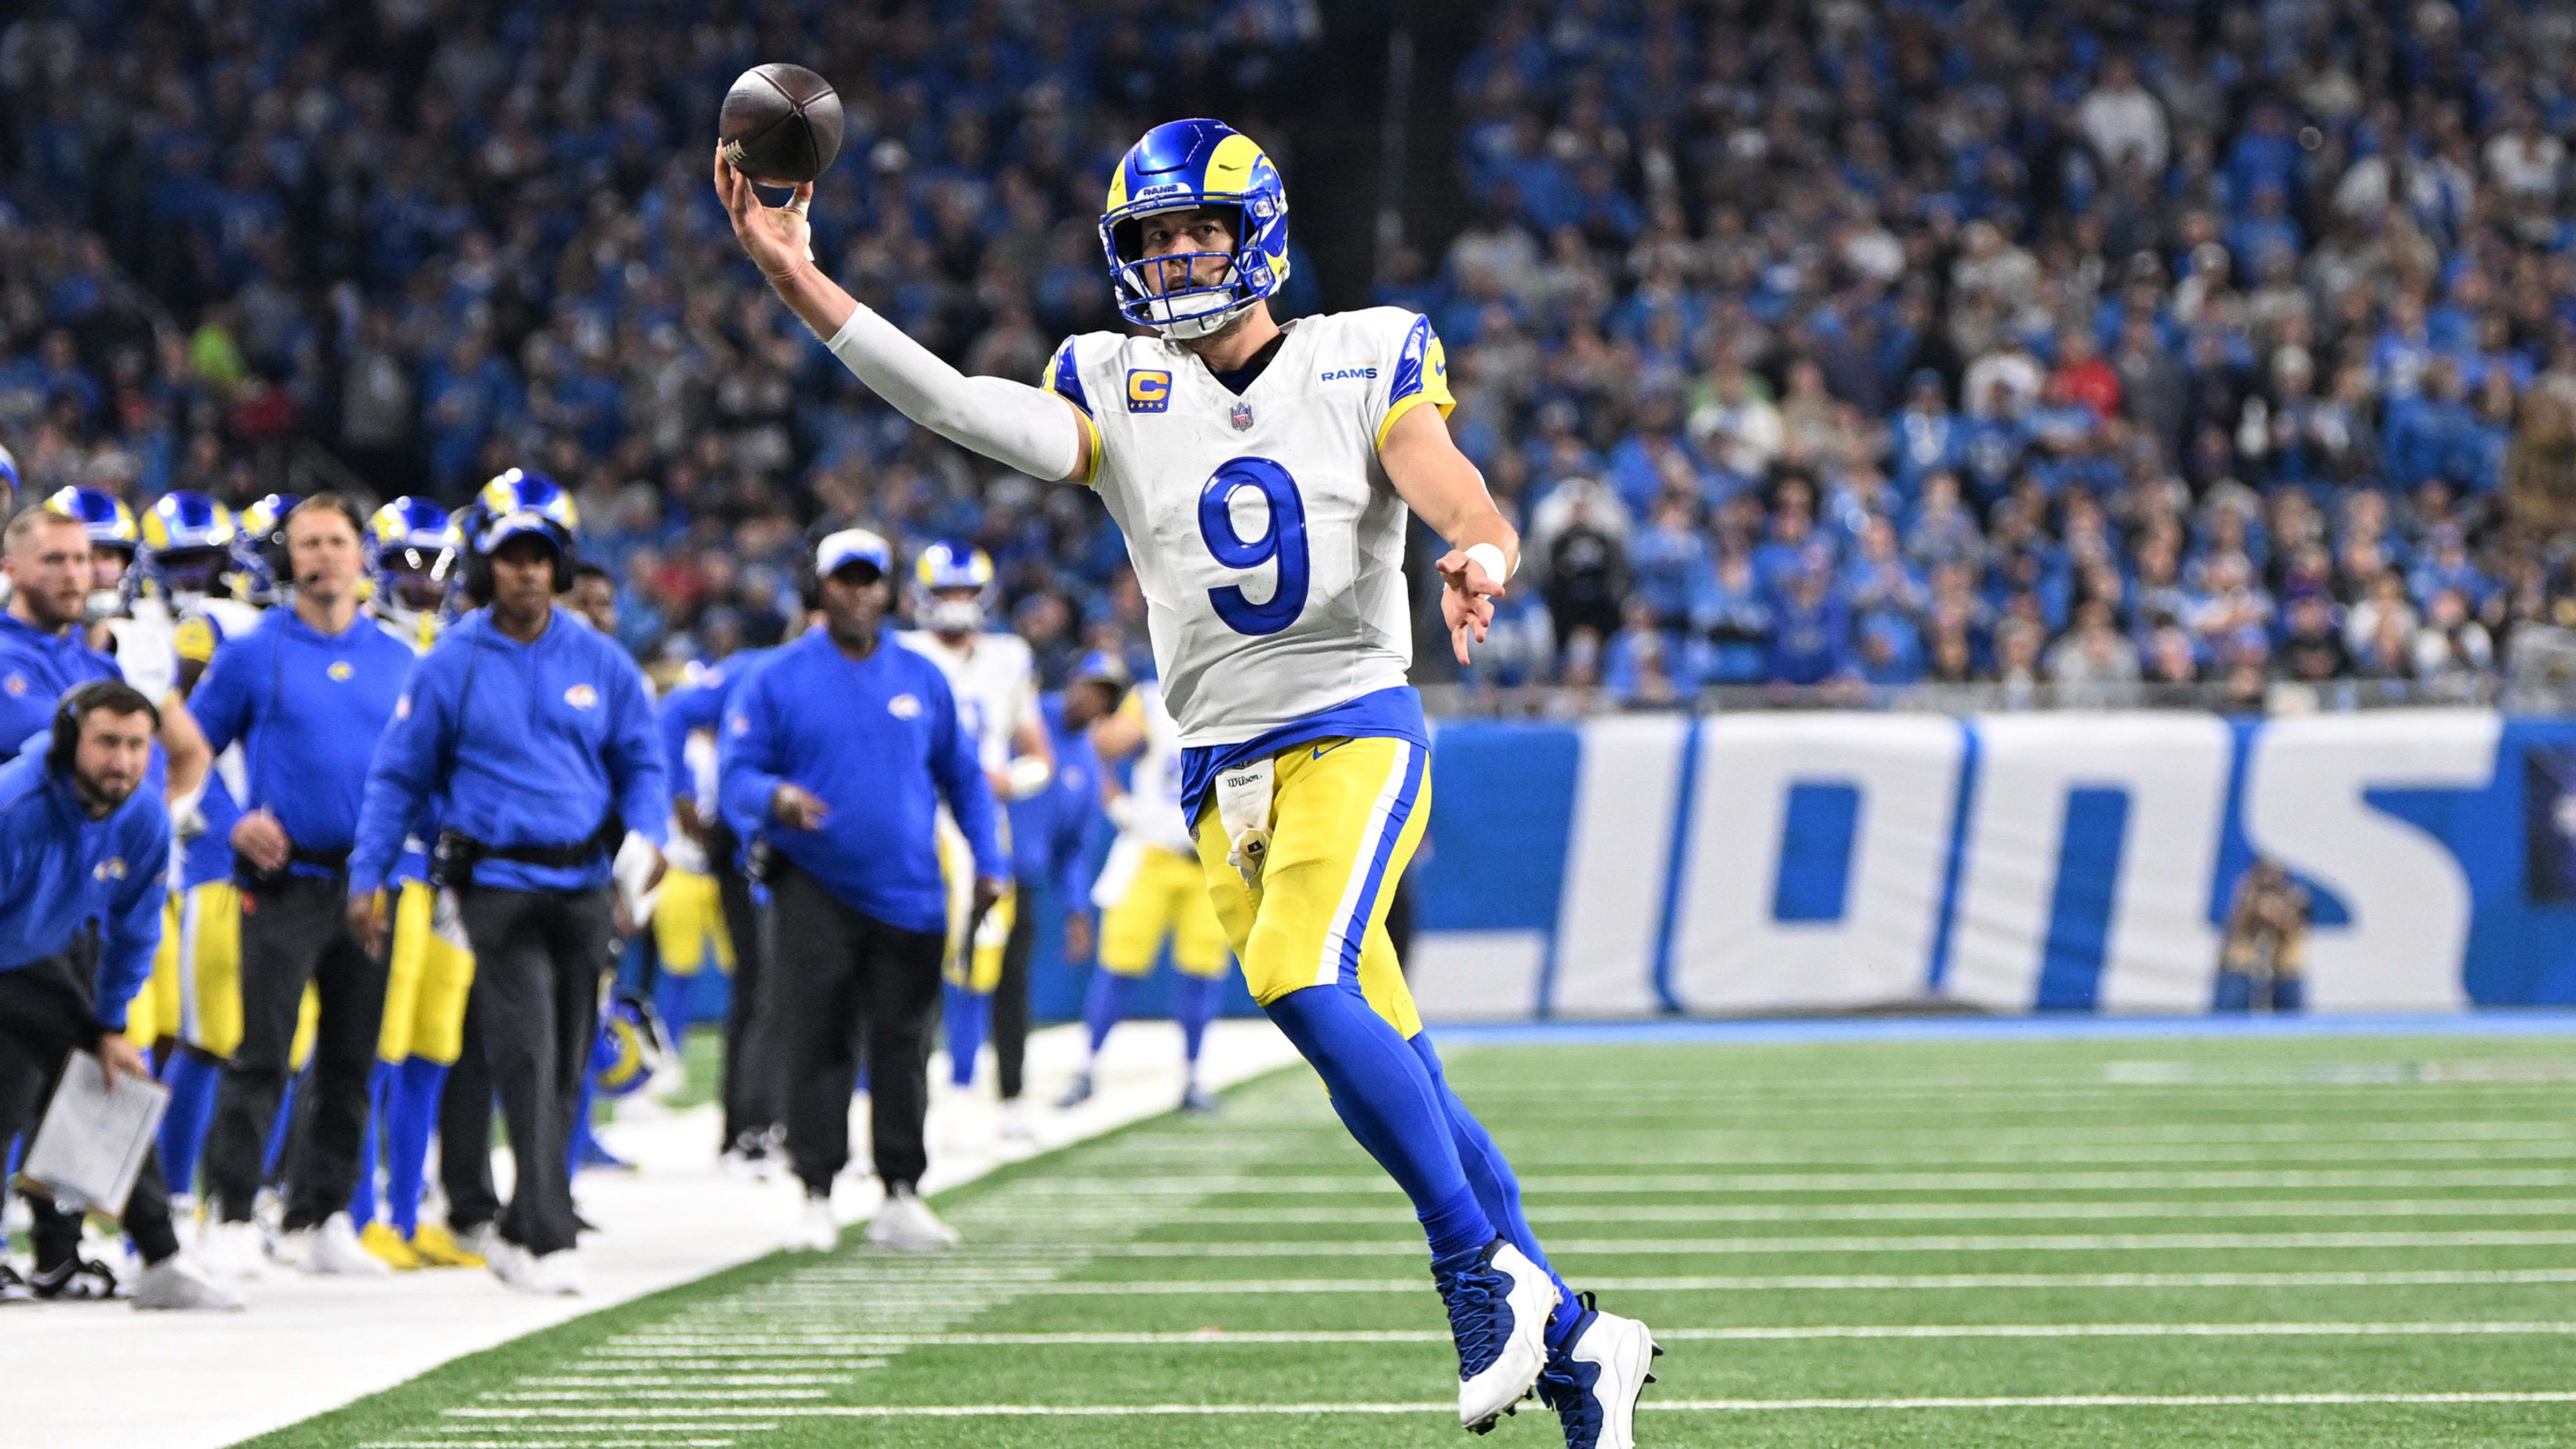 How Much Longer Can Rams Count on Matthew Stafford?